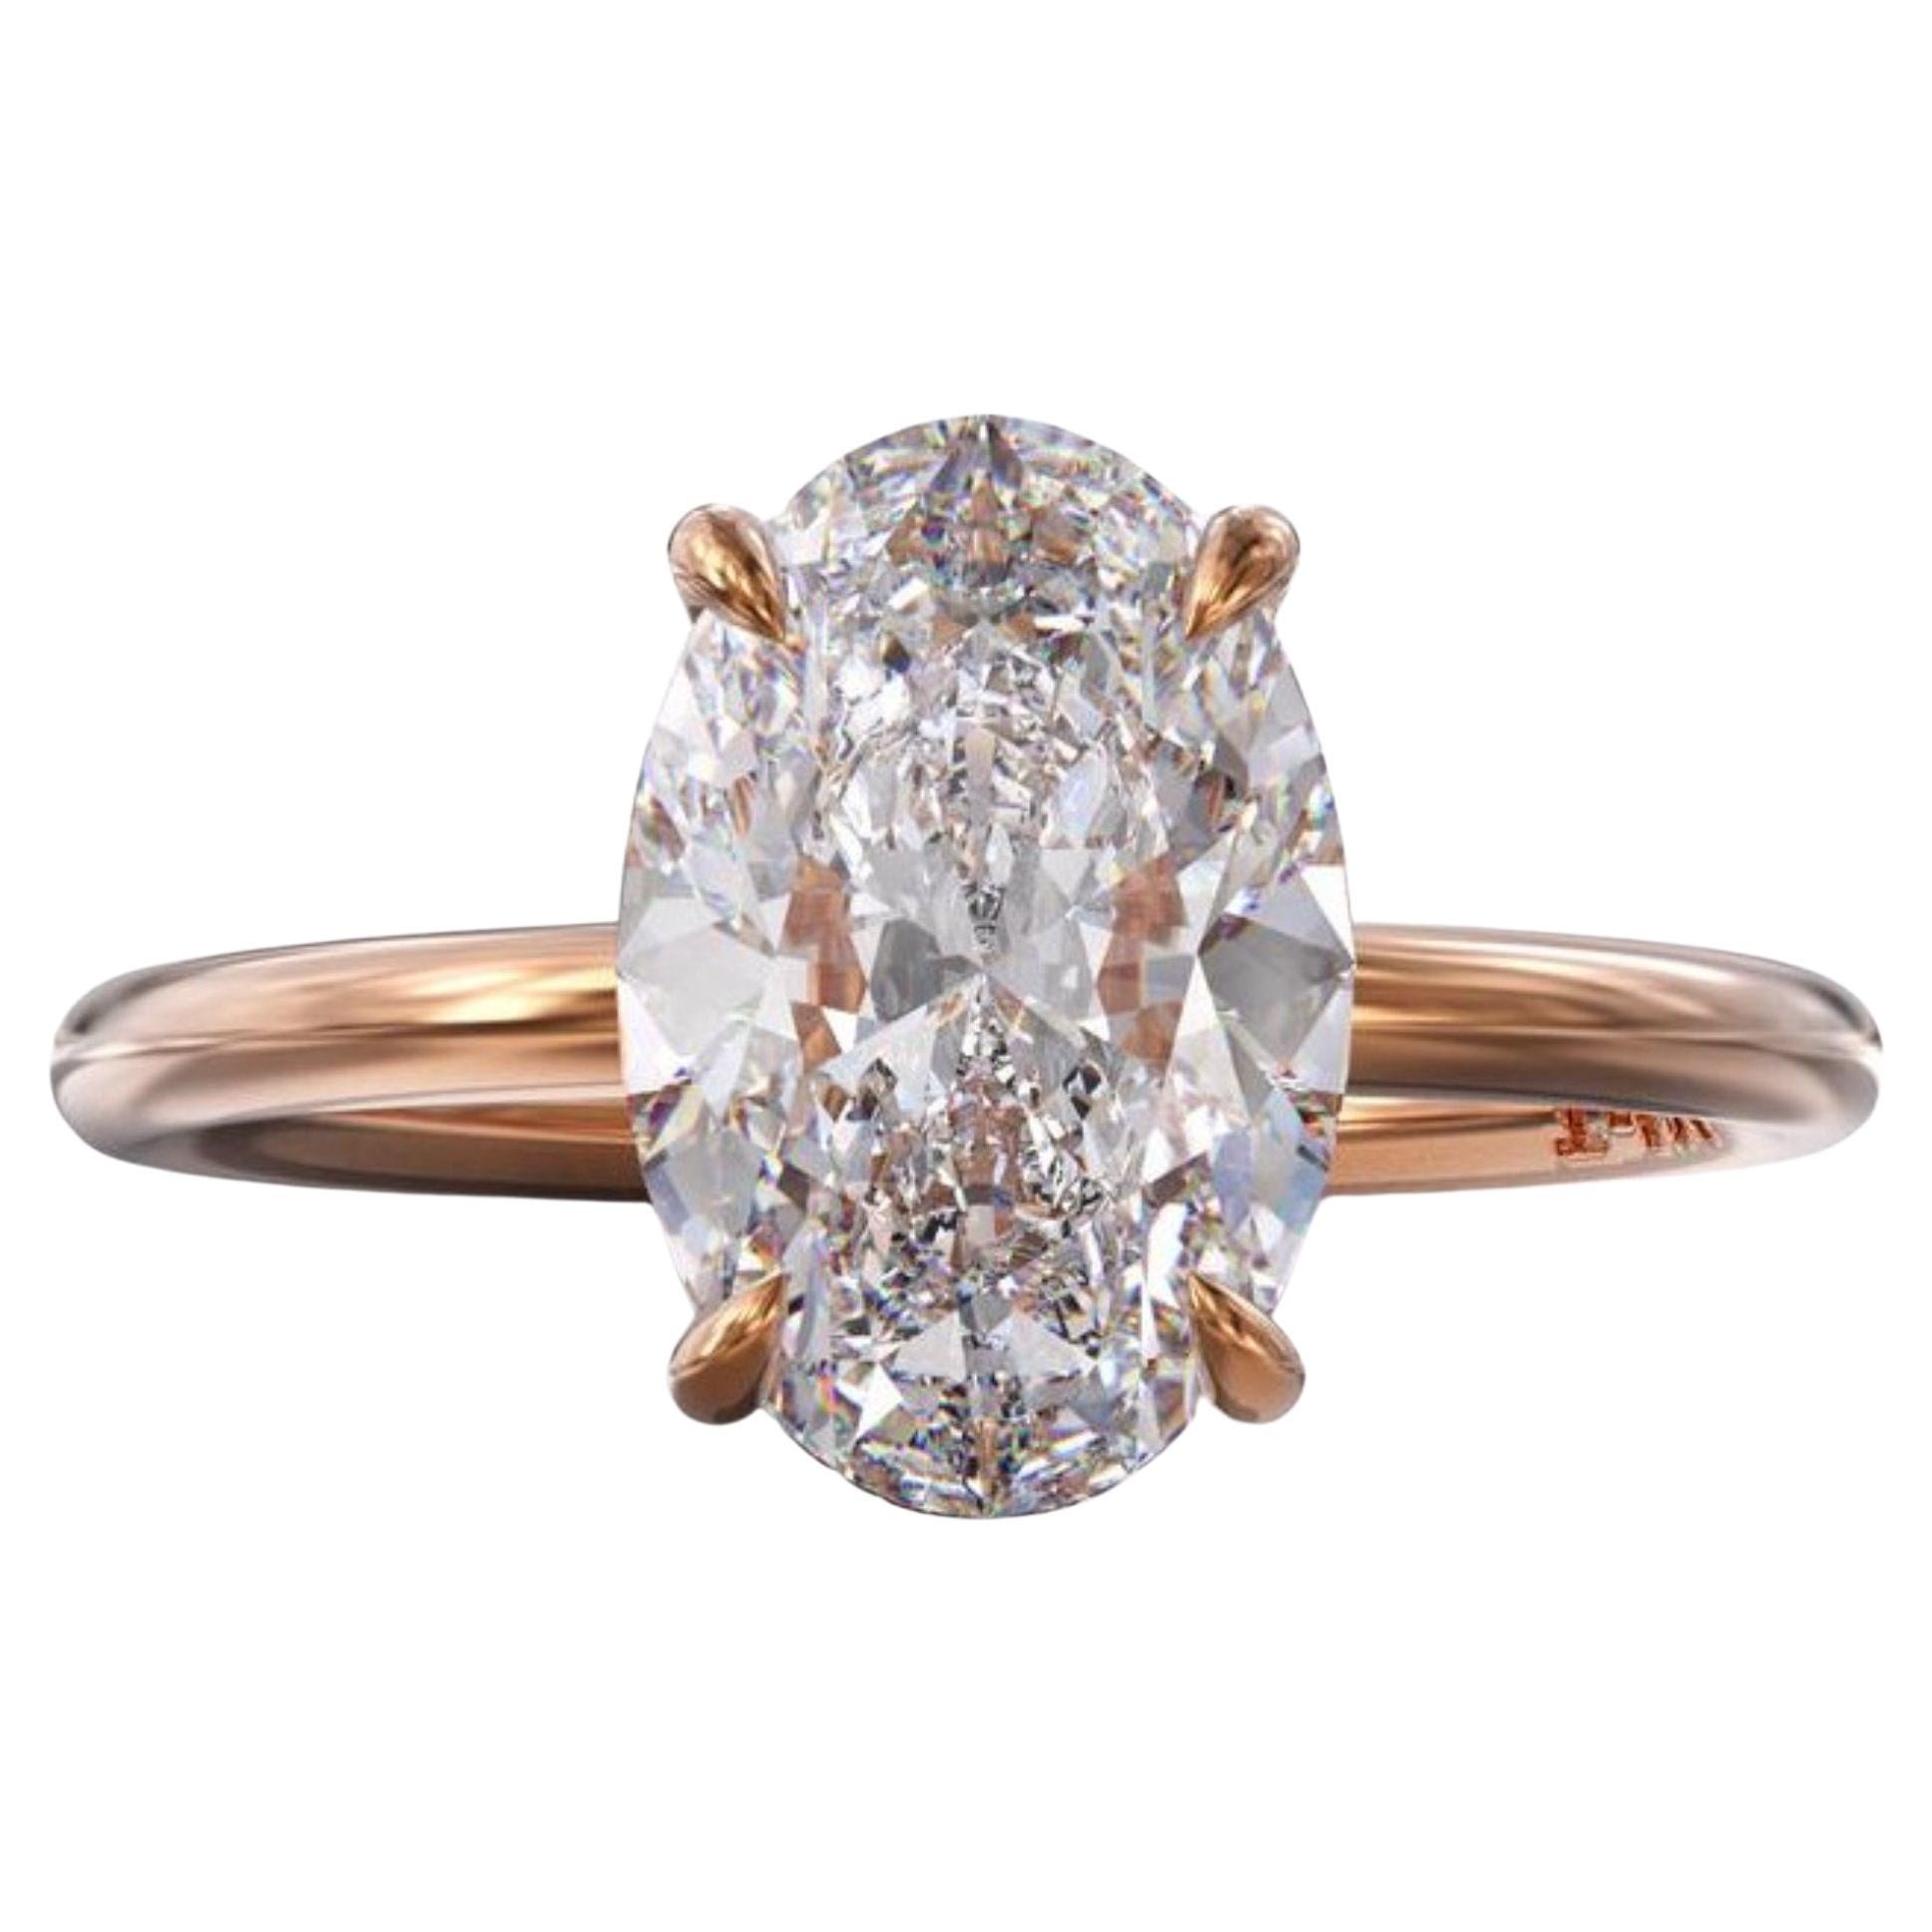 For Sale:  Certified 3 CT Natural Diamond Engagement Ring in 18K Gold, Cocktail Ring